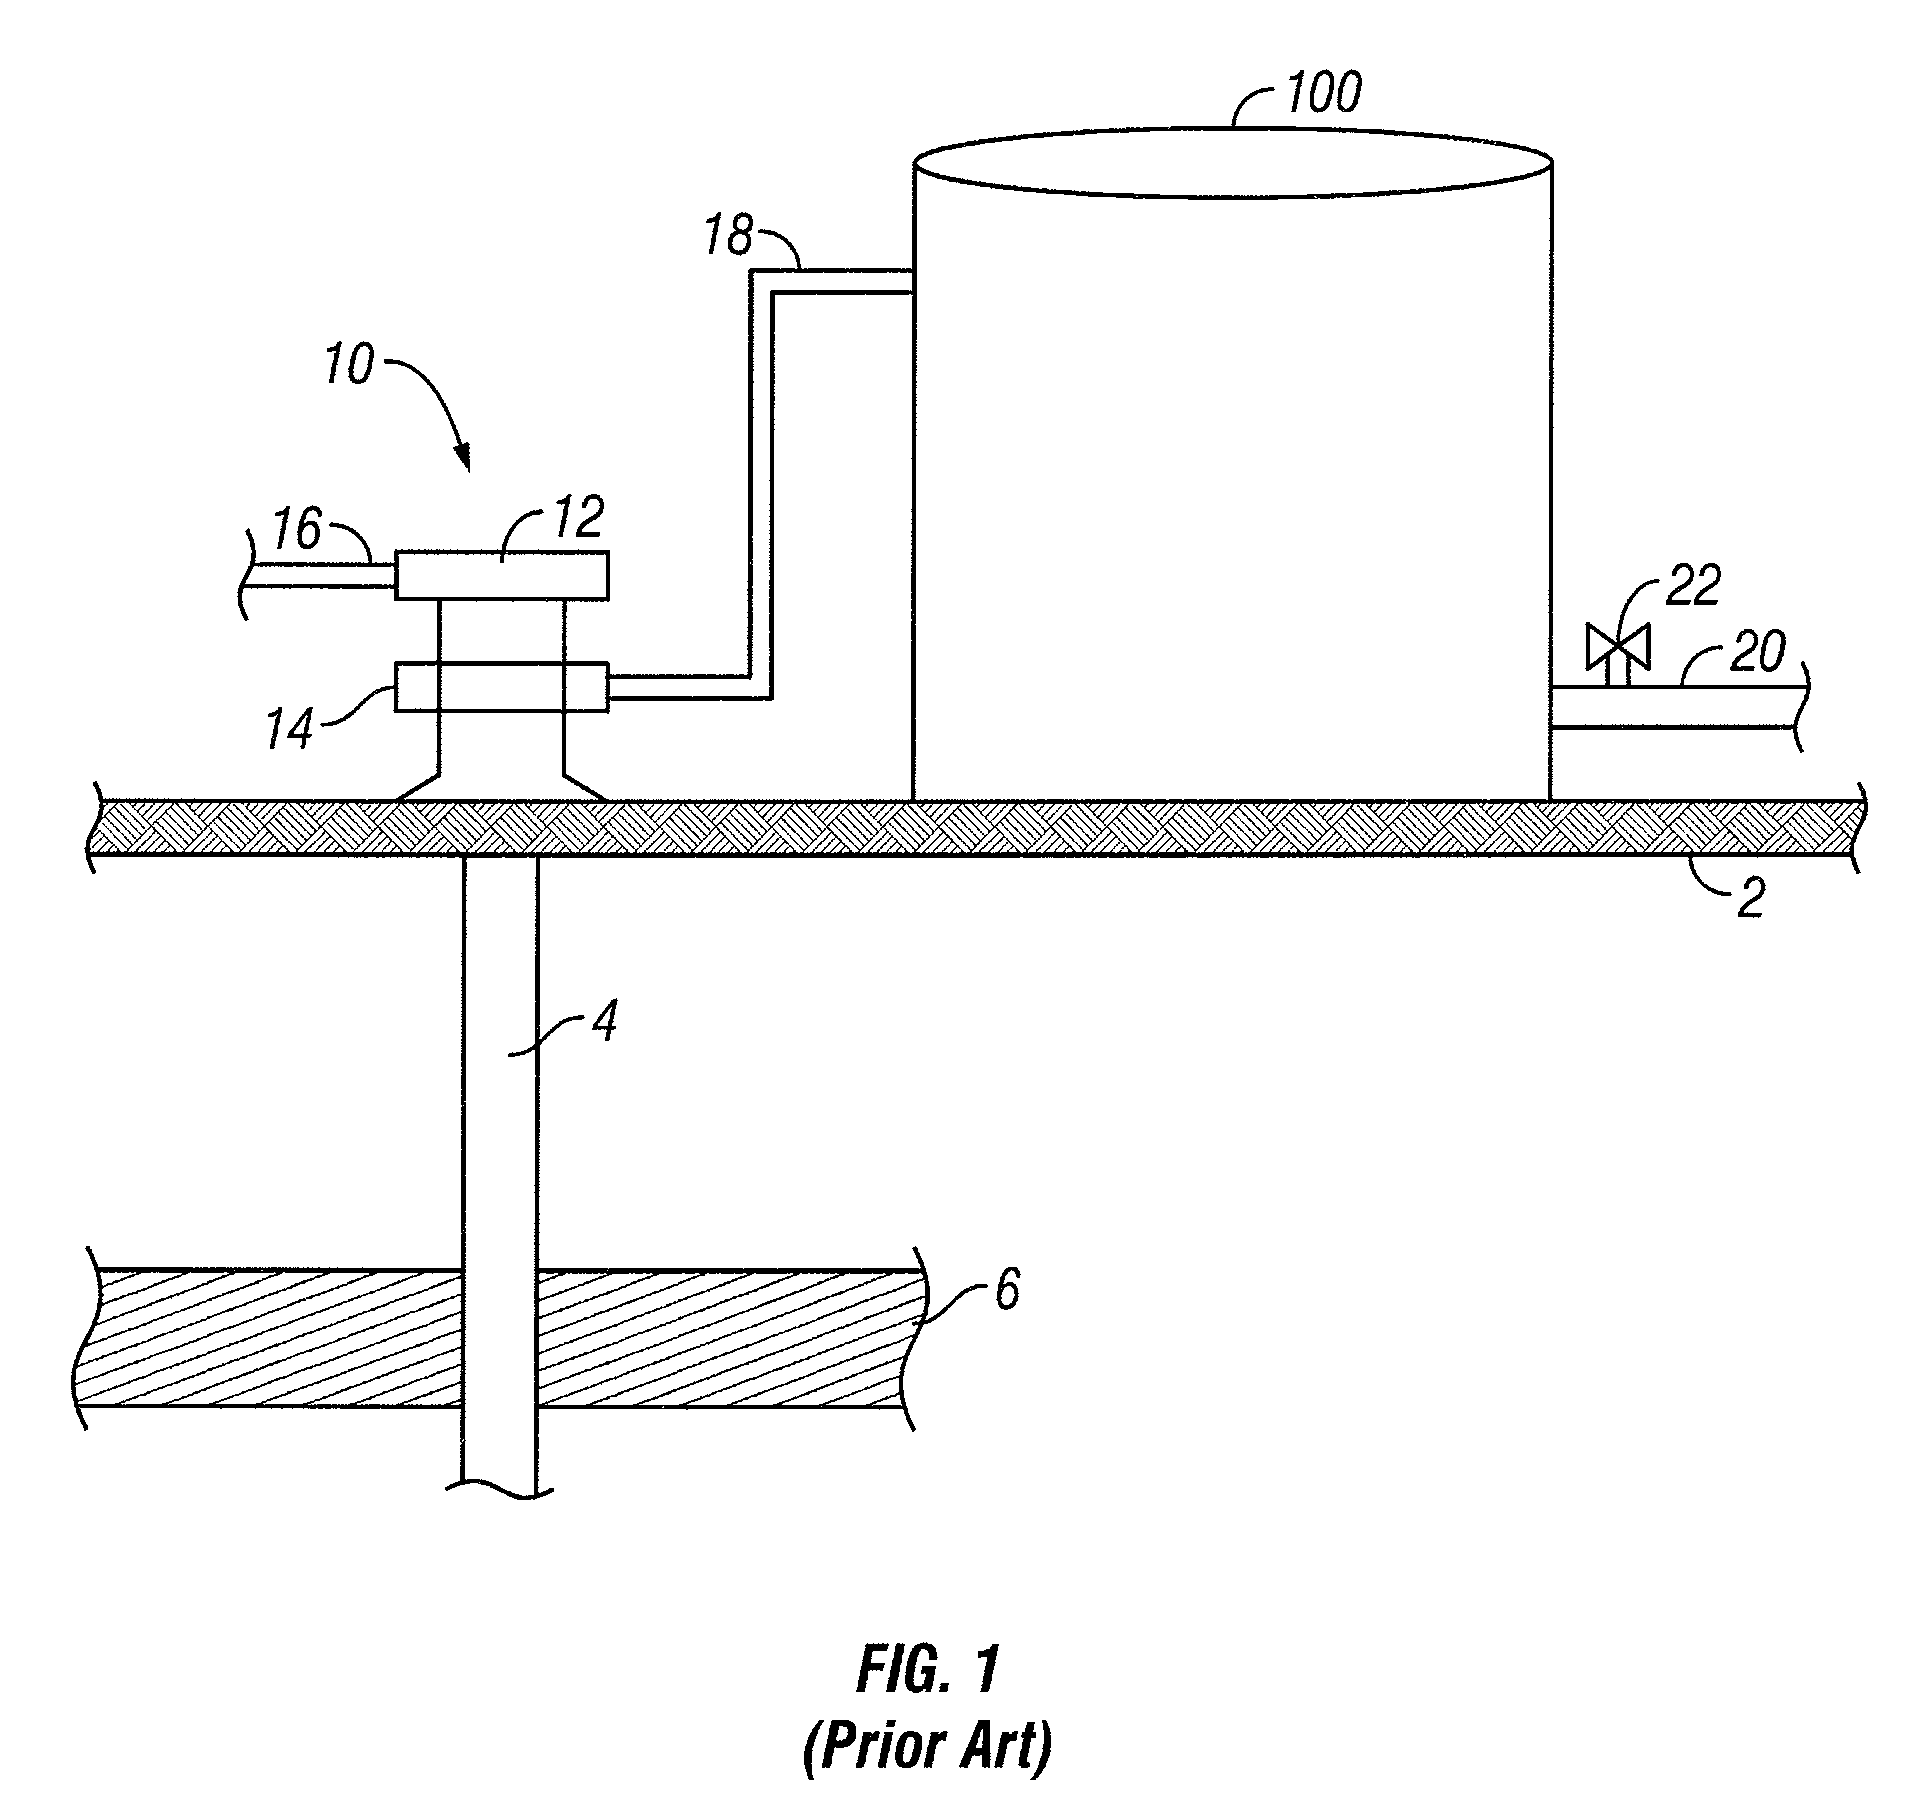 Method of constructing a secondary containment area